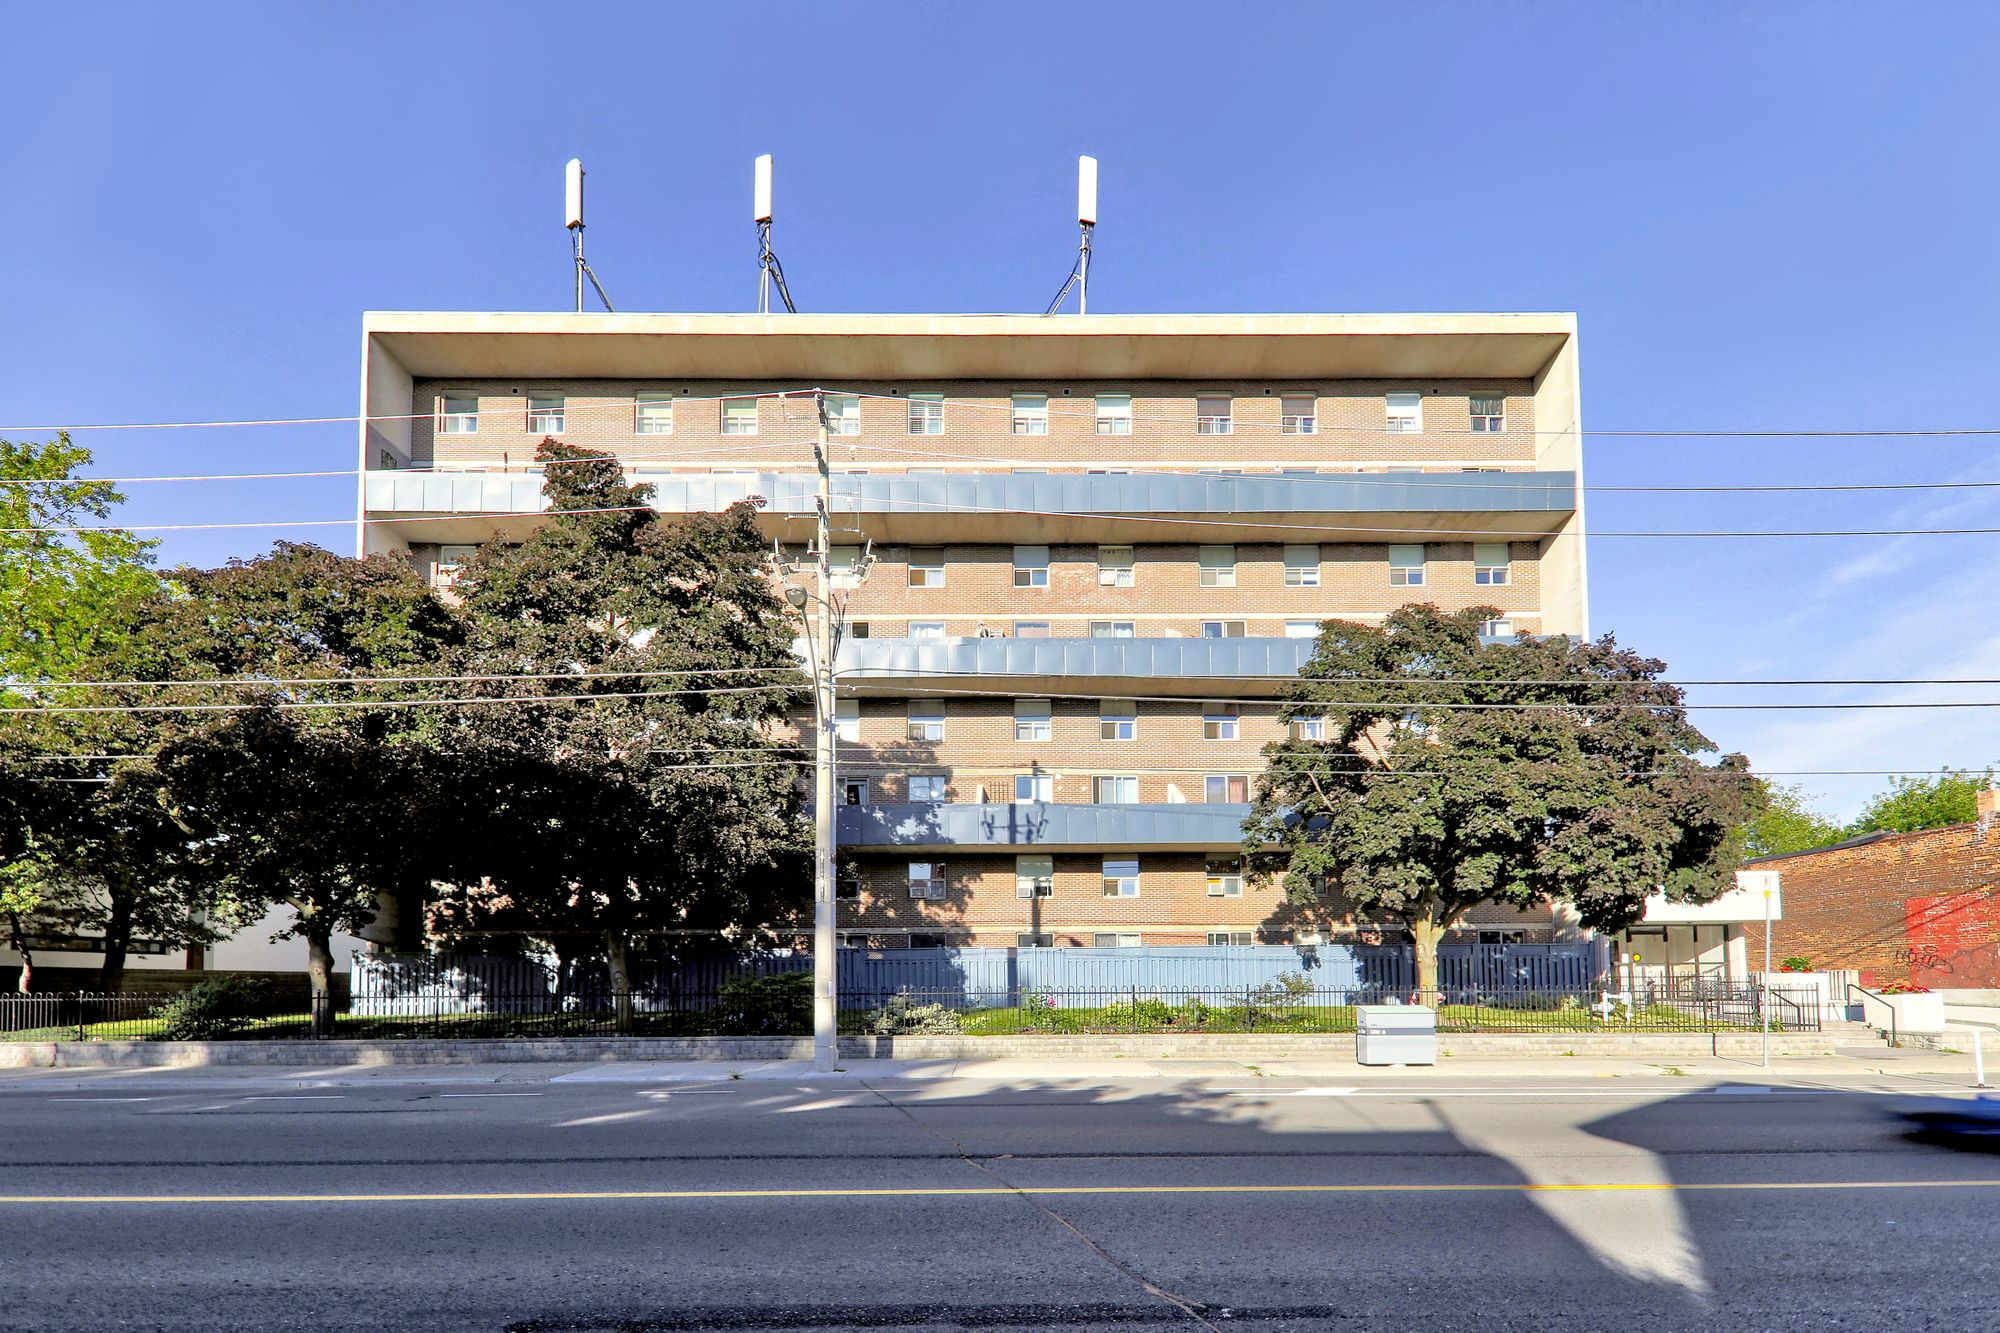 1071 Woodbine Ave. This condo at 1071 Woodbine Avenue Condos is located in  East York, Toronto - image #2 of 4 by Strata.ca